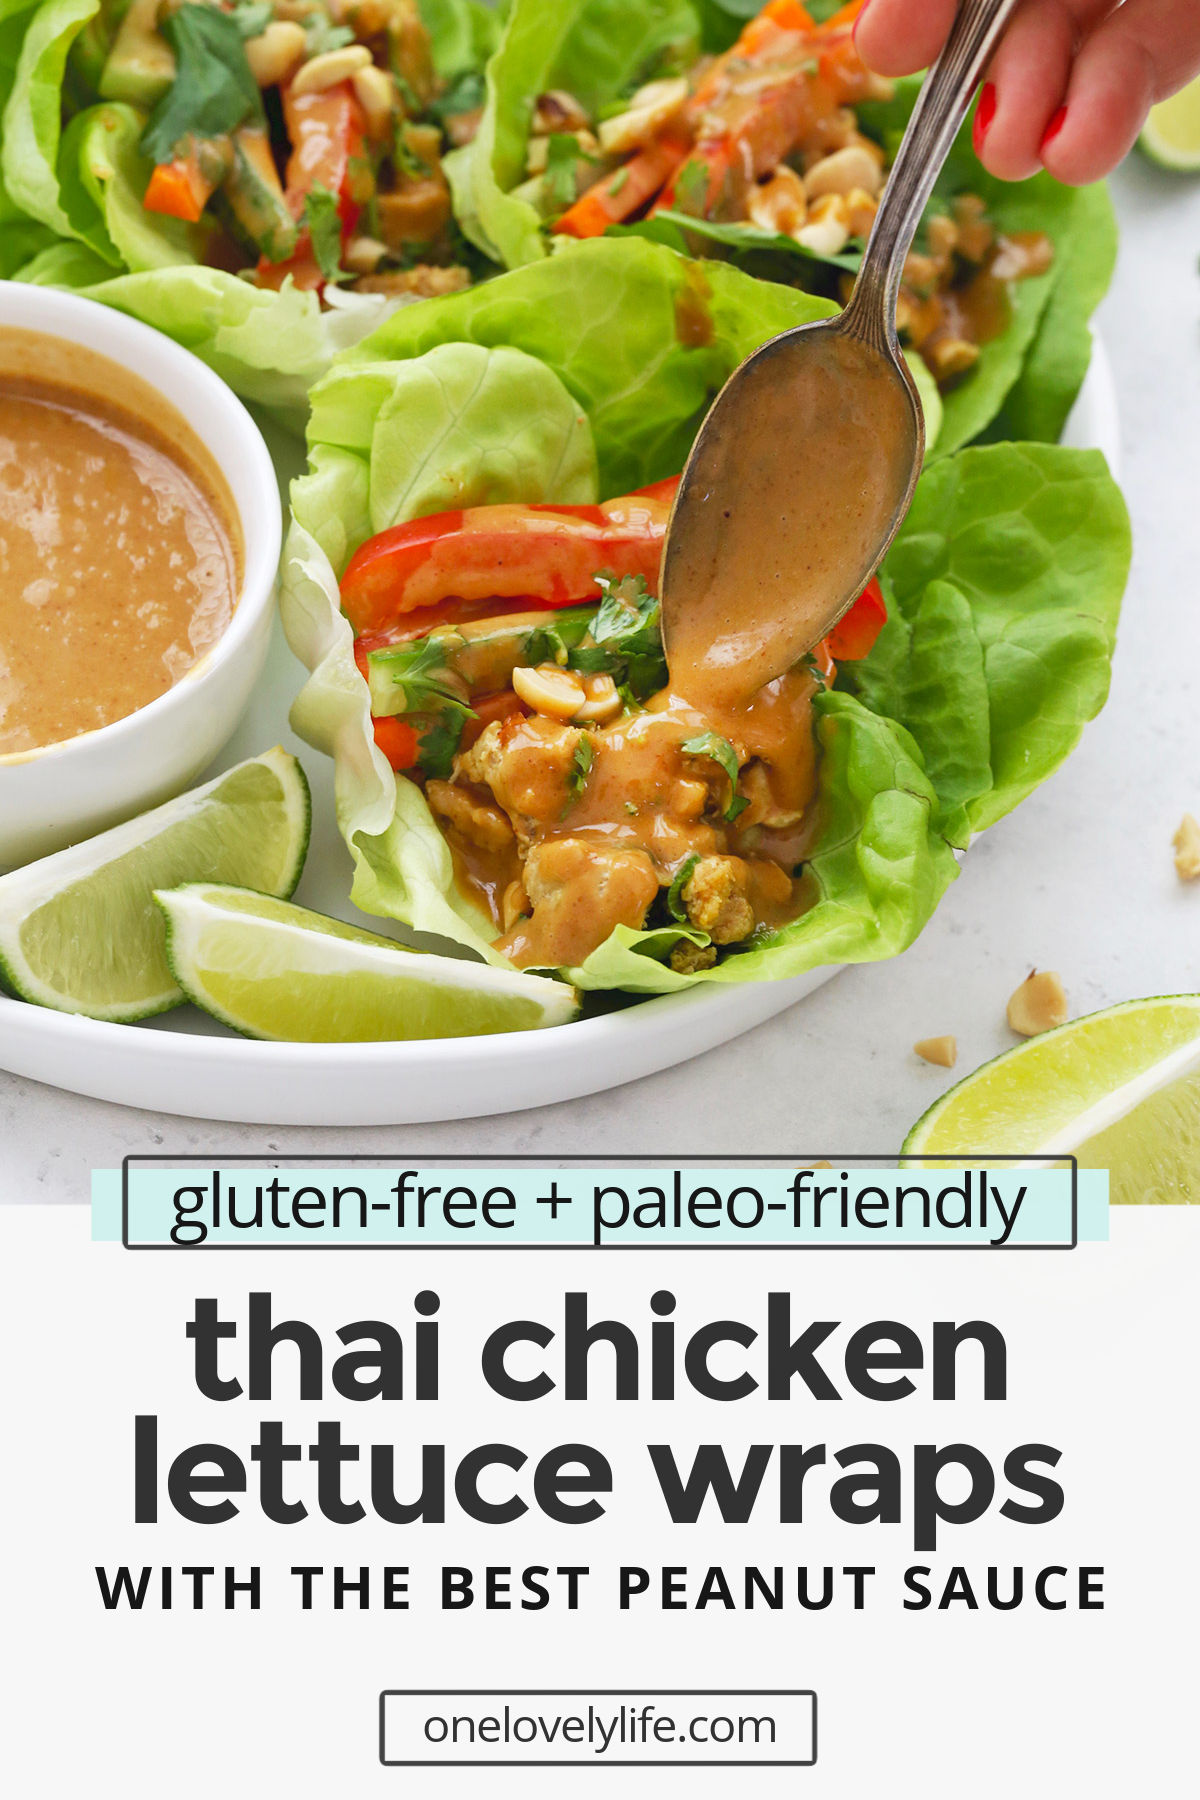 Thai Chicken Lettuce Wraps with Peanut Sauce - These Peanut Chicken Lettuce Wraps use flavorful chicken, crisp, fresh veggies, and THE BEST peanut sauce to make a delicious, easy dinner. // Peanut Lettuce Wraps // Easy dinner // Healthy Dinner #peanutsauce #lettucewraps #chicken #healthydinner #easydinner